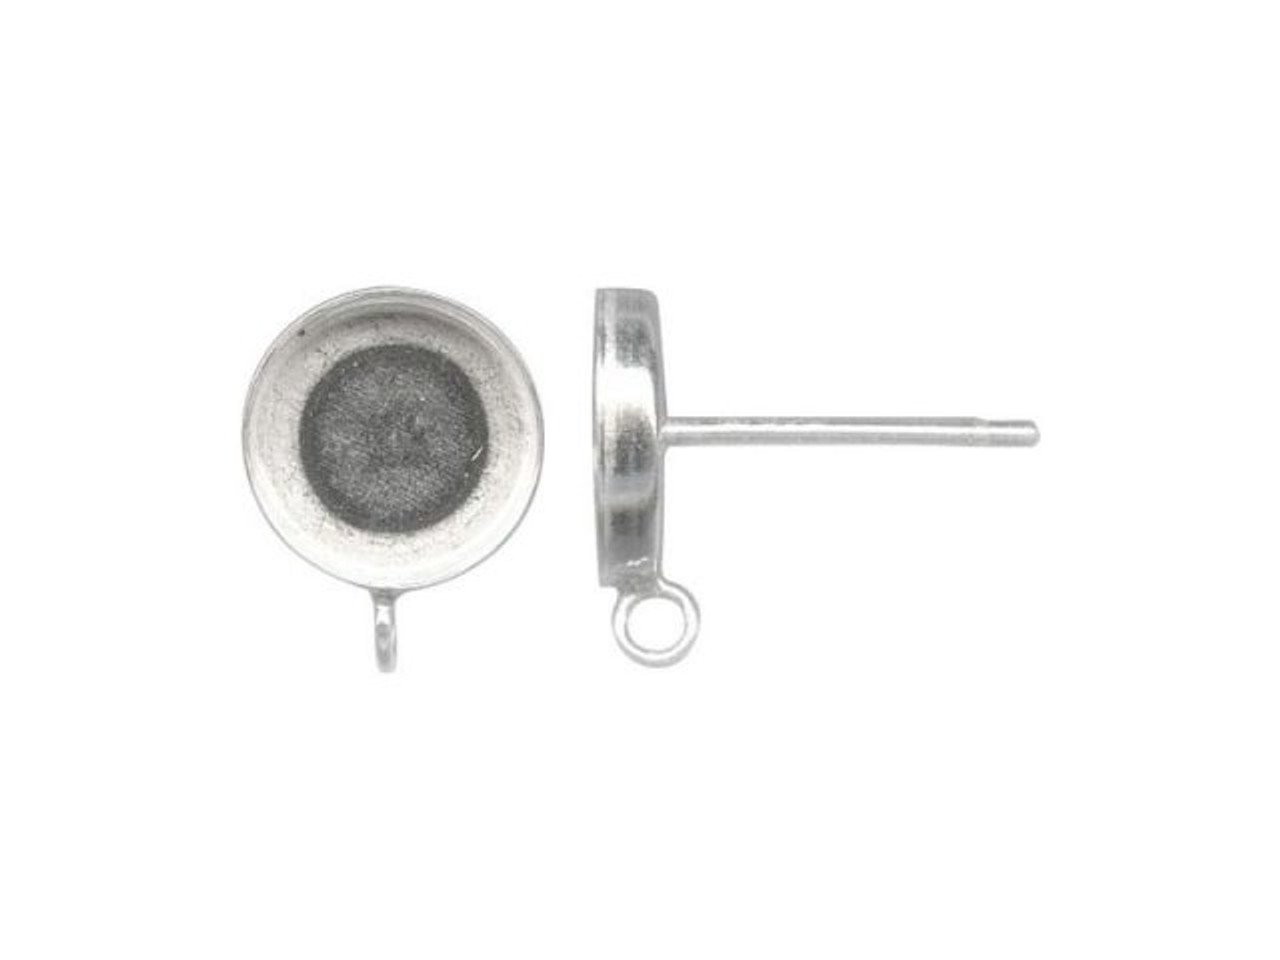 Jewelry, 925 Sterling Silver Jewelry Making Supplies